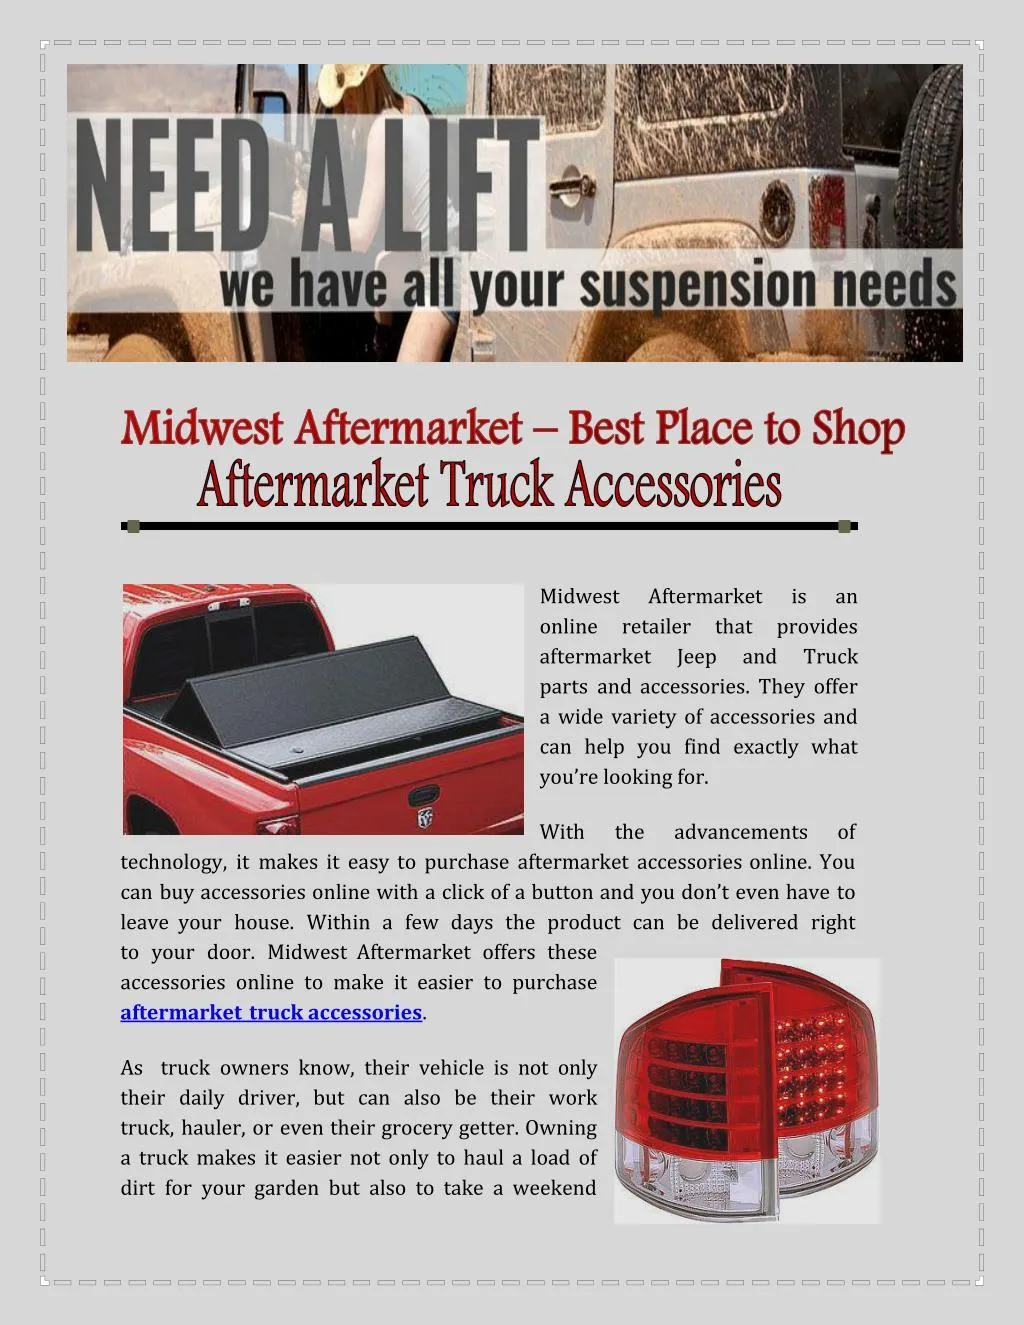 midwest online retailer that provides aftermarket